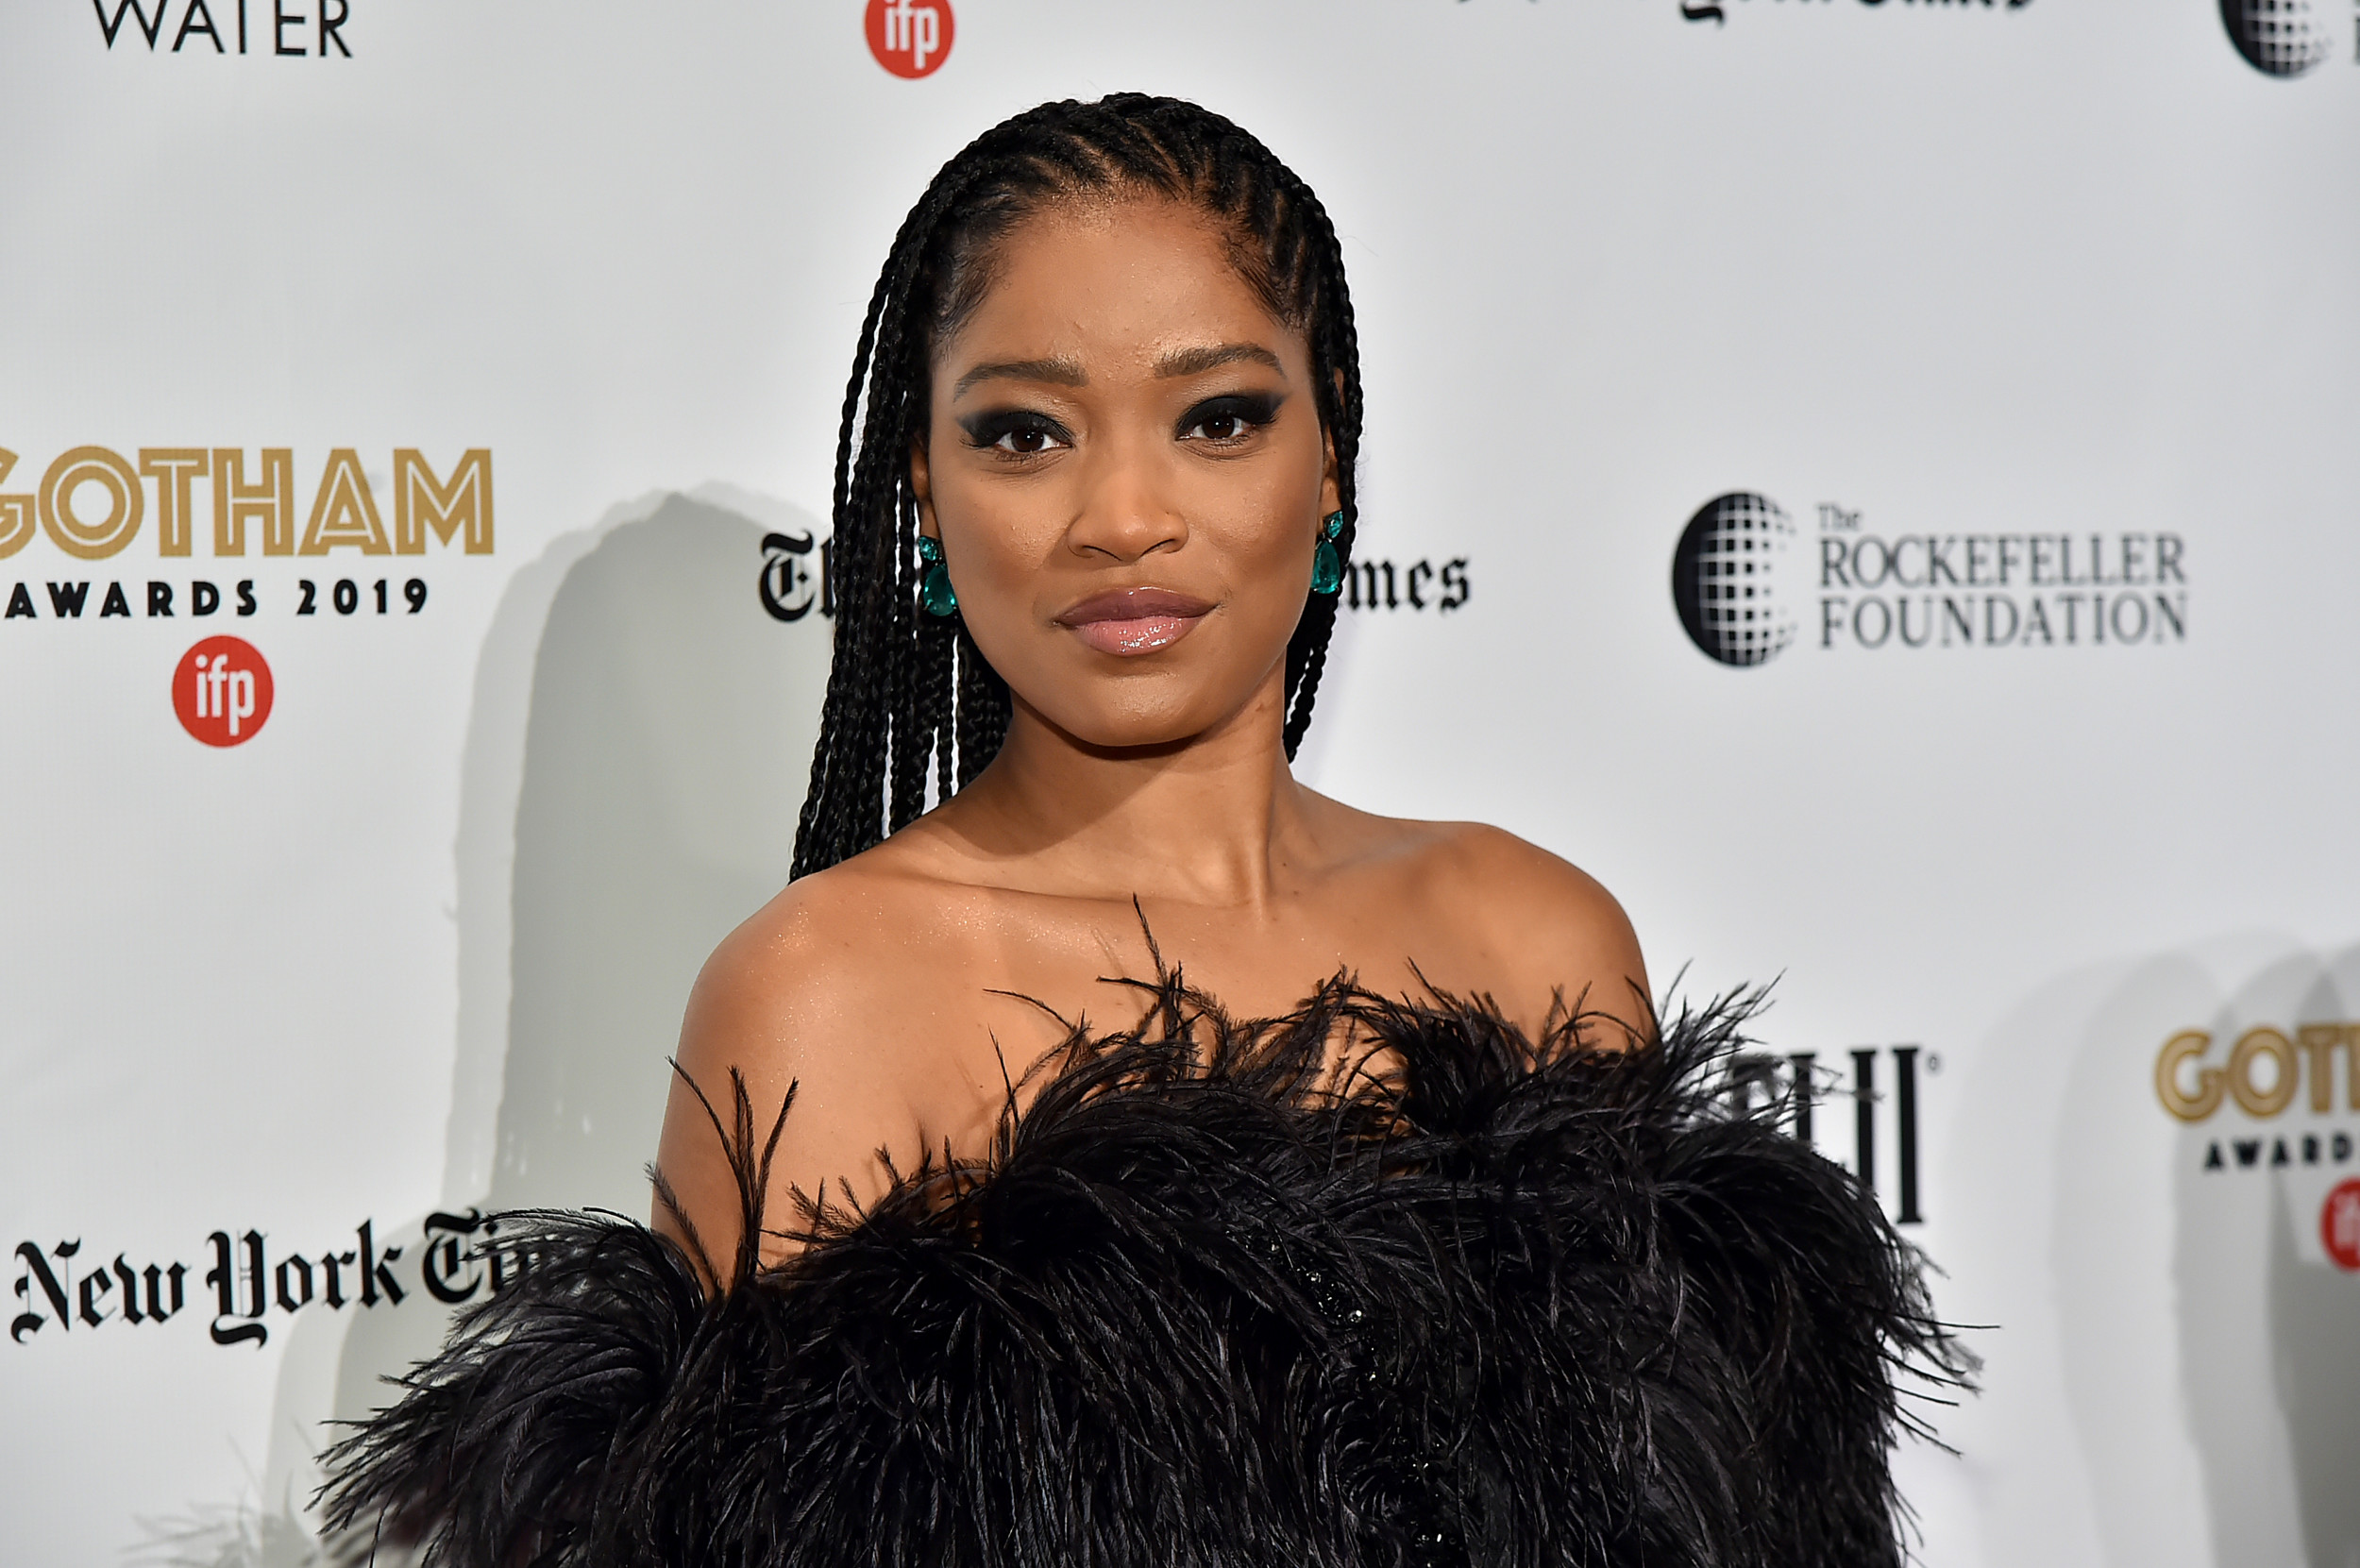 Keke Palmer Imagines a World Where EBT Cards Only Work ‘on Healthy Items’